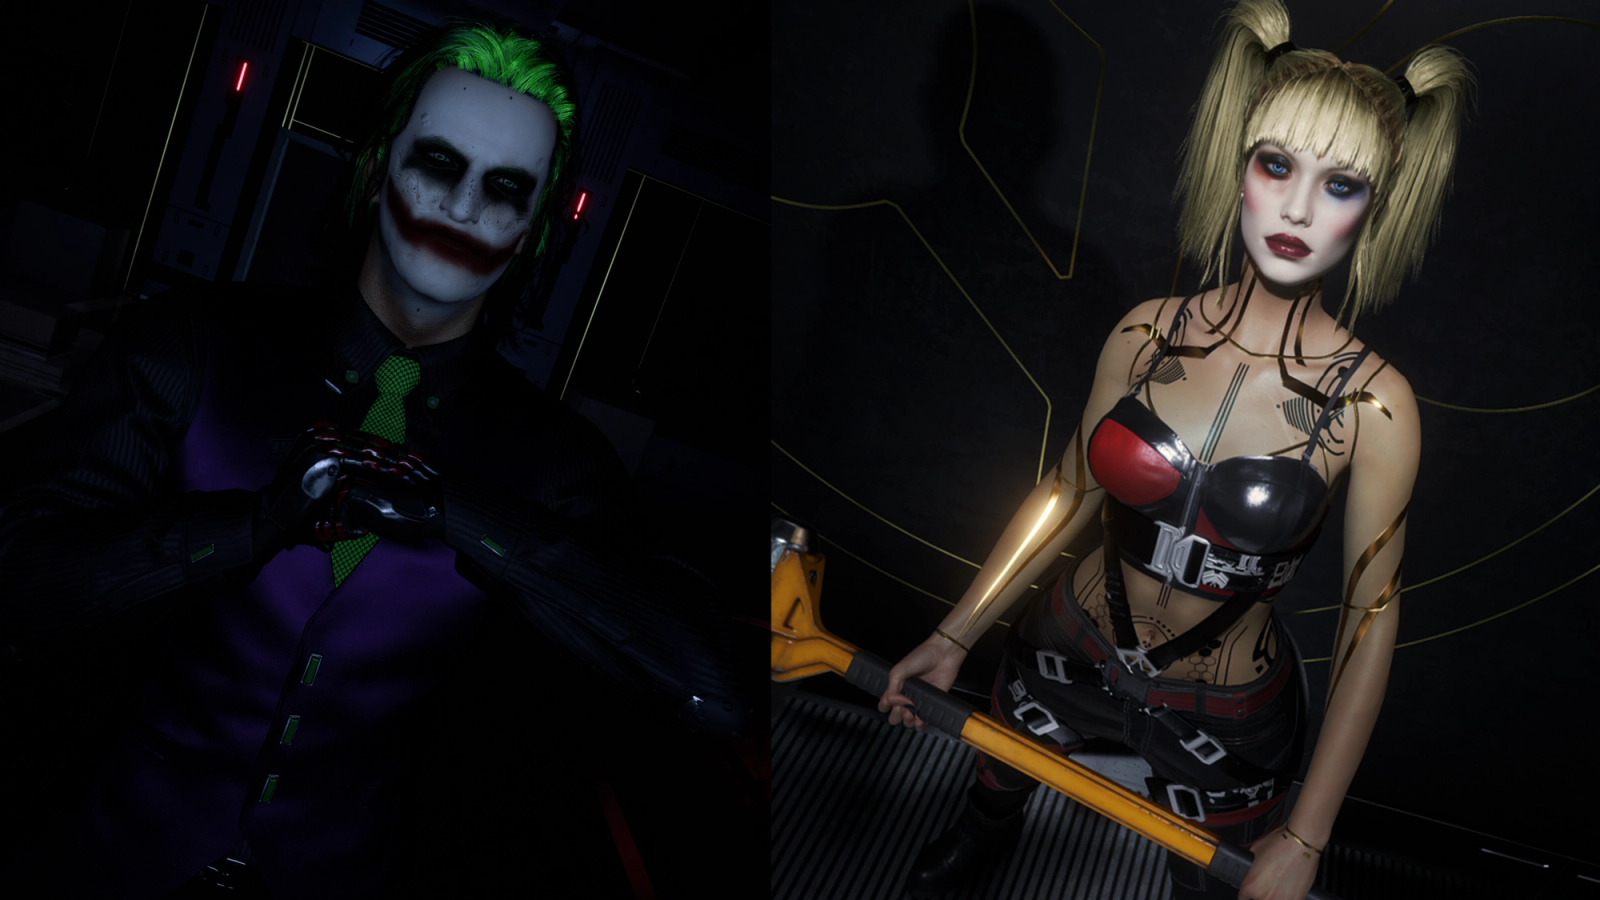 The Joker and Harley Quinn Mods displayed side by side